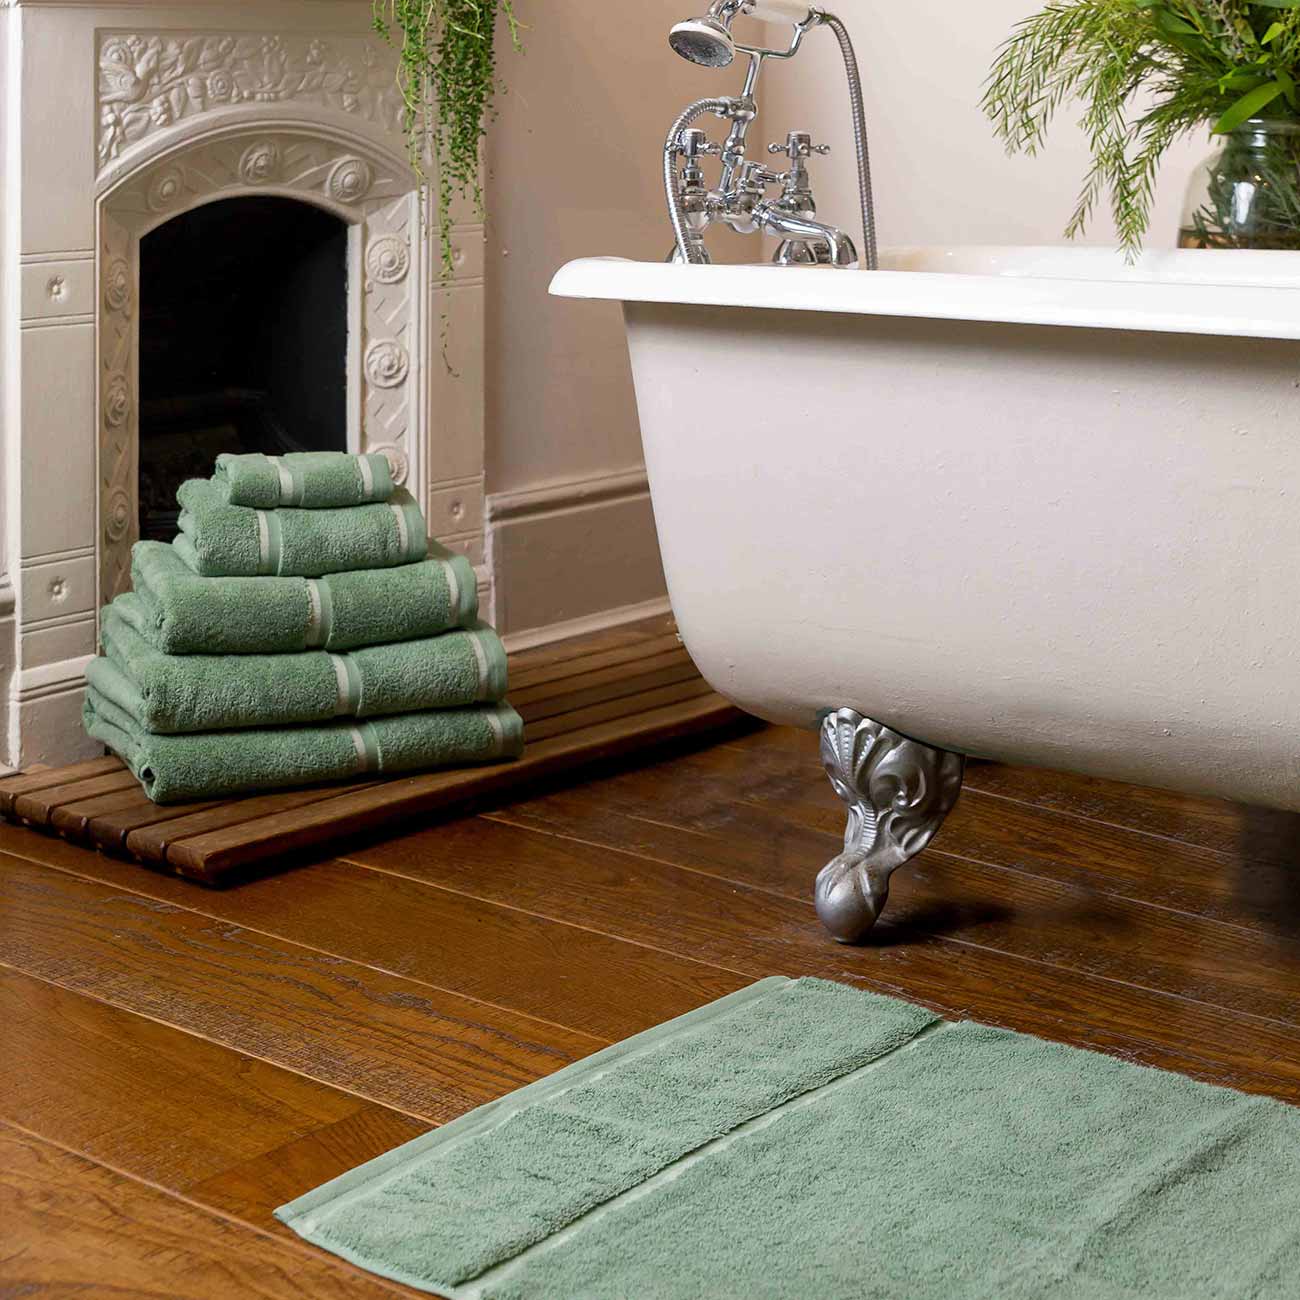 Meadow Green Towels and Bath Mat